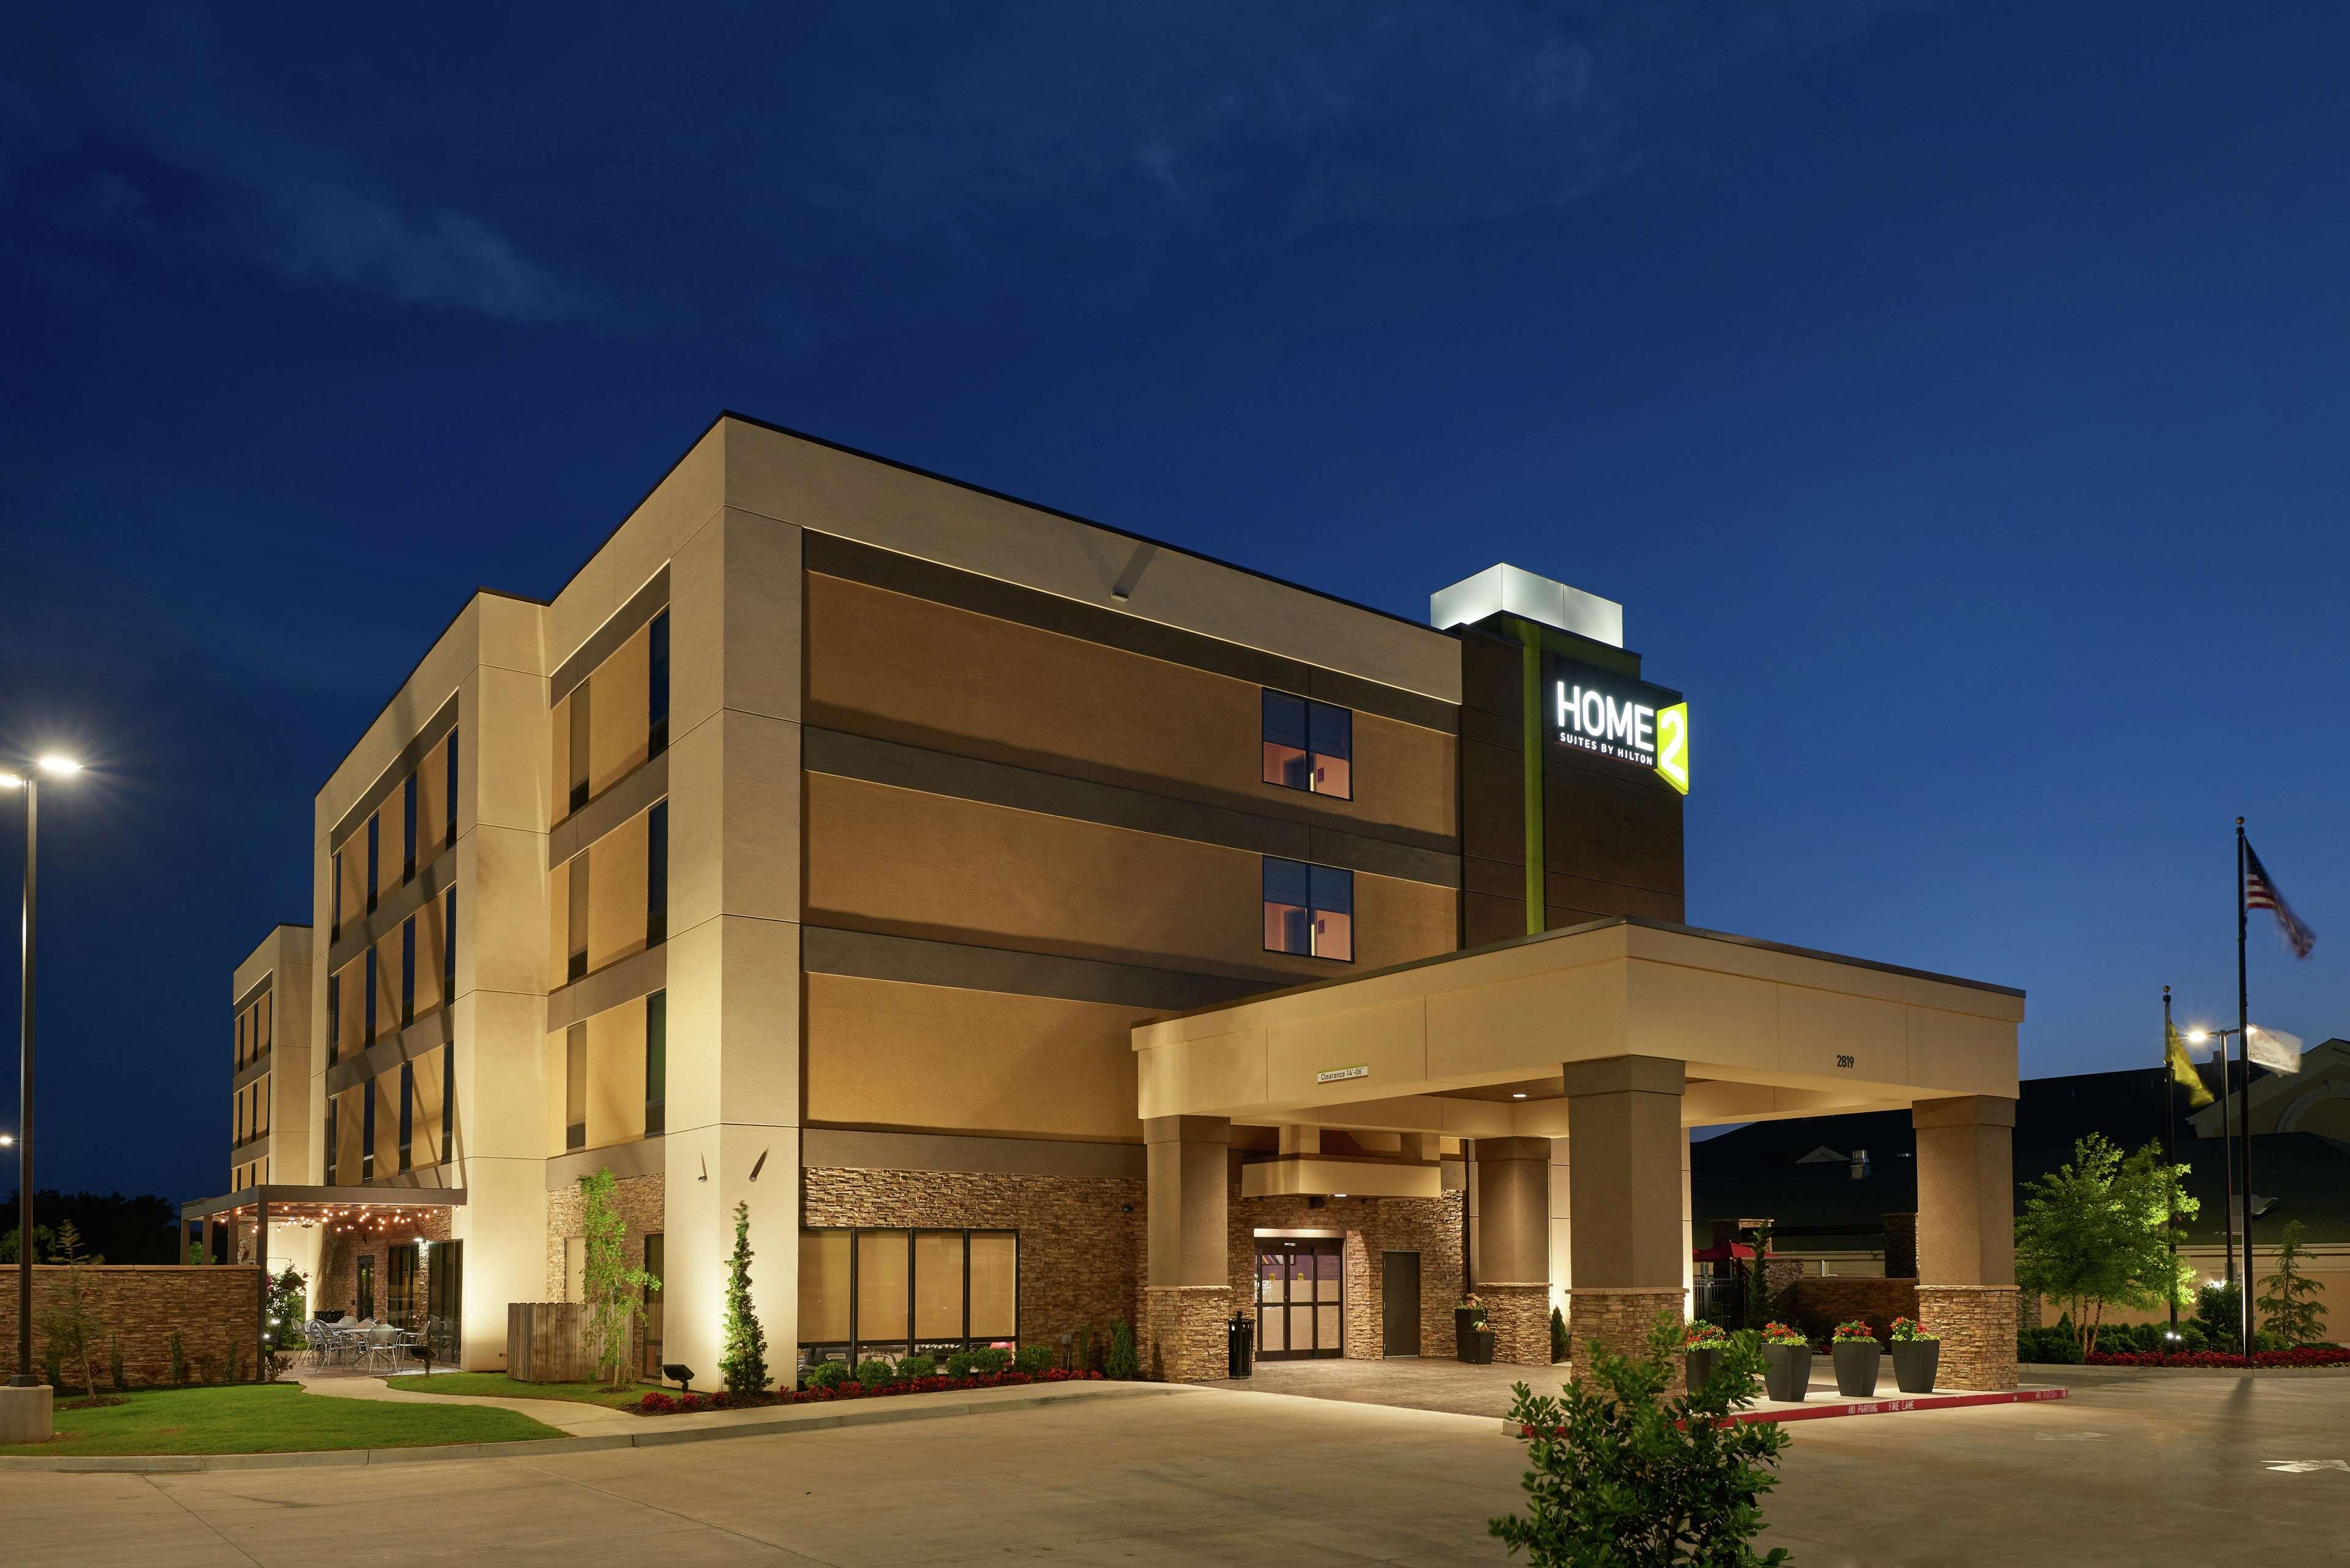 Home2 Suites by Hilton Muskogee image